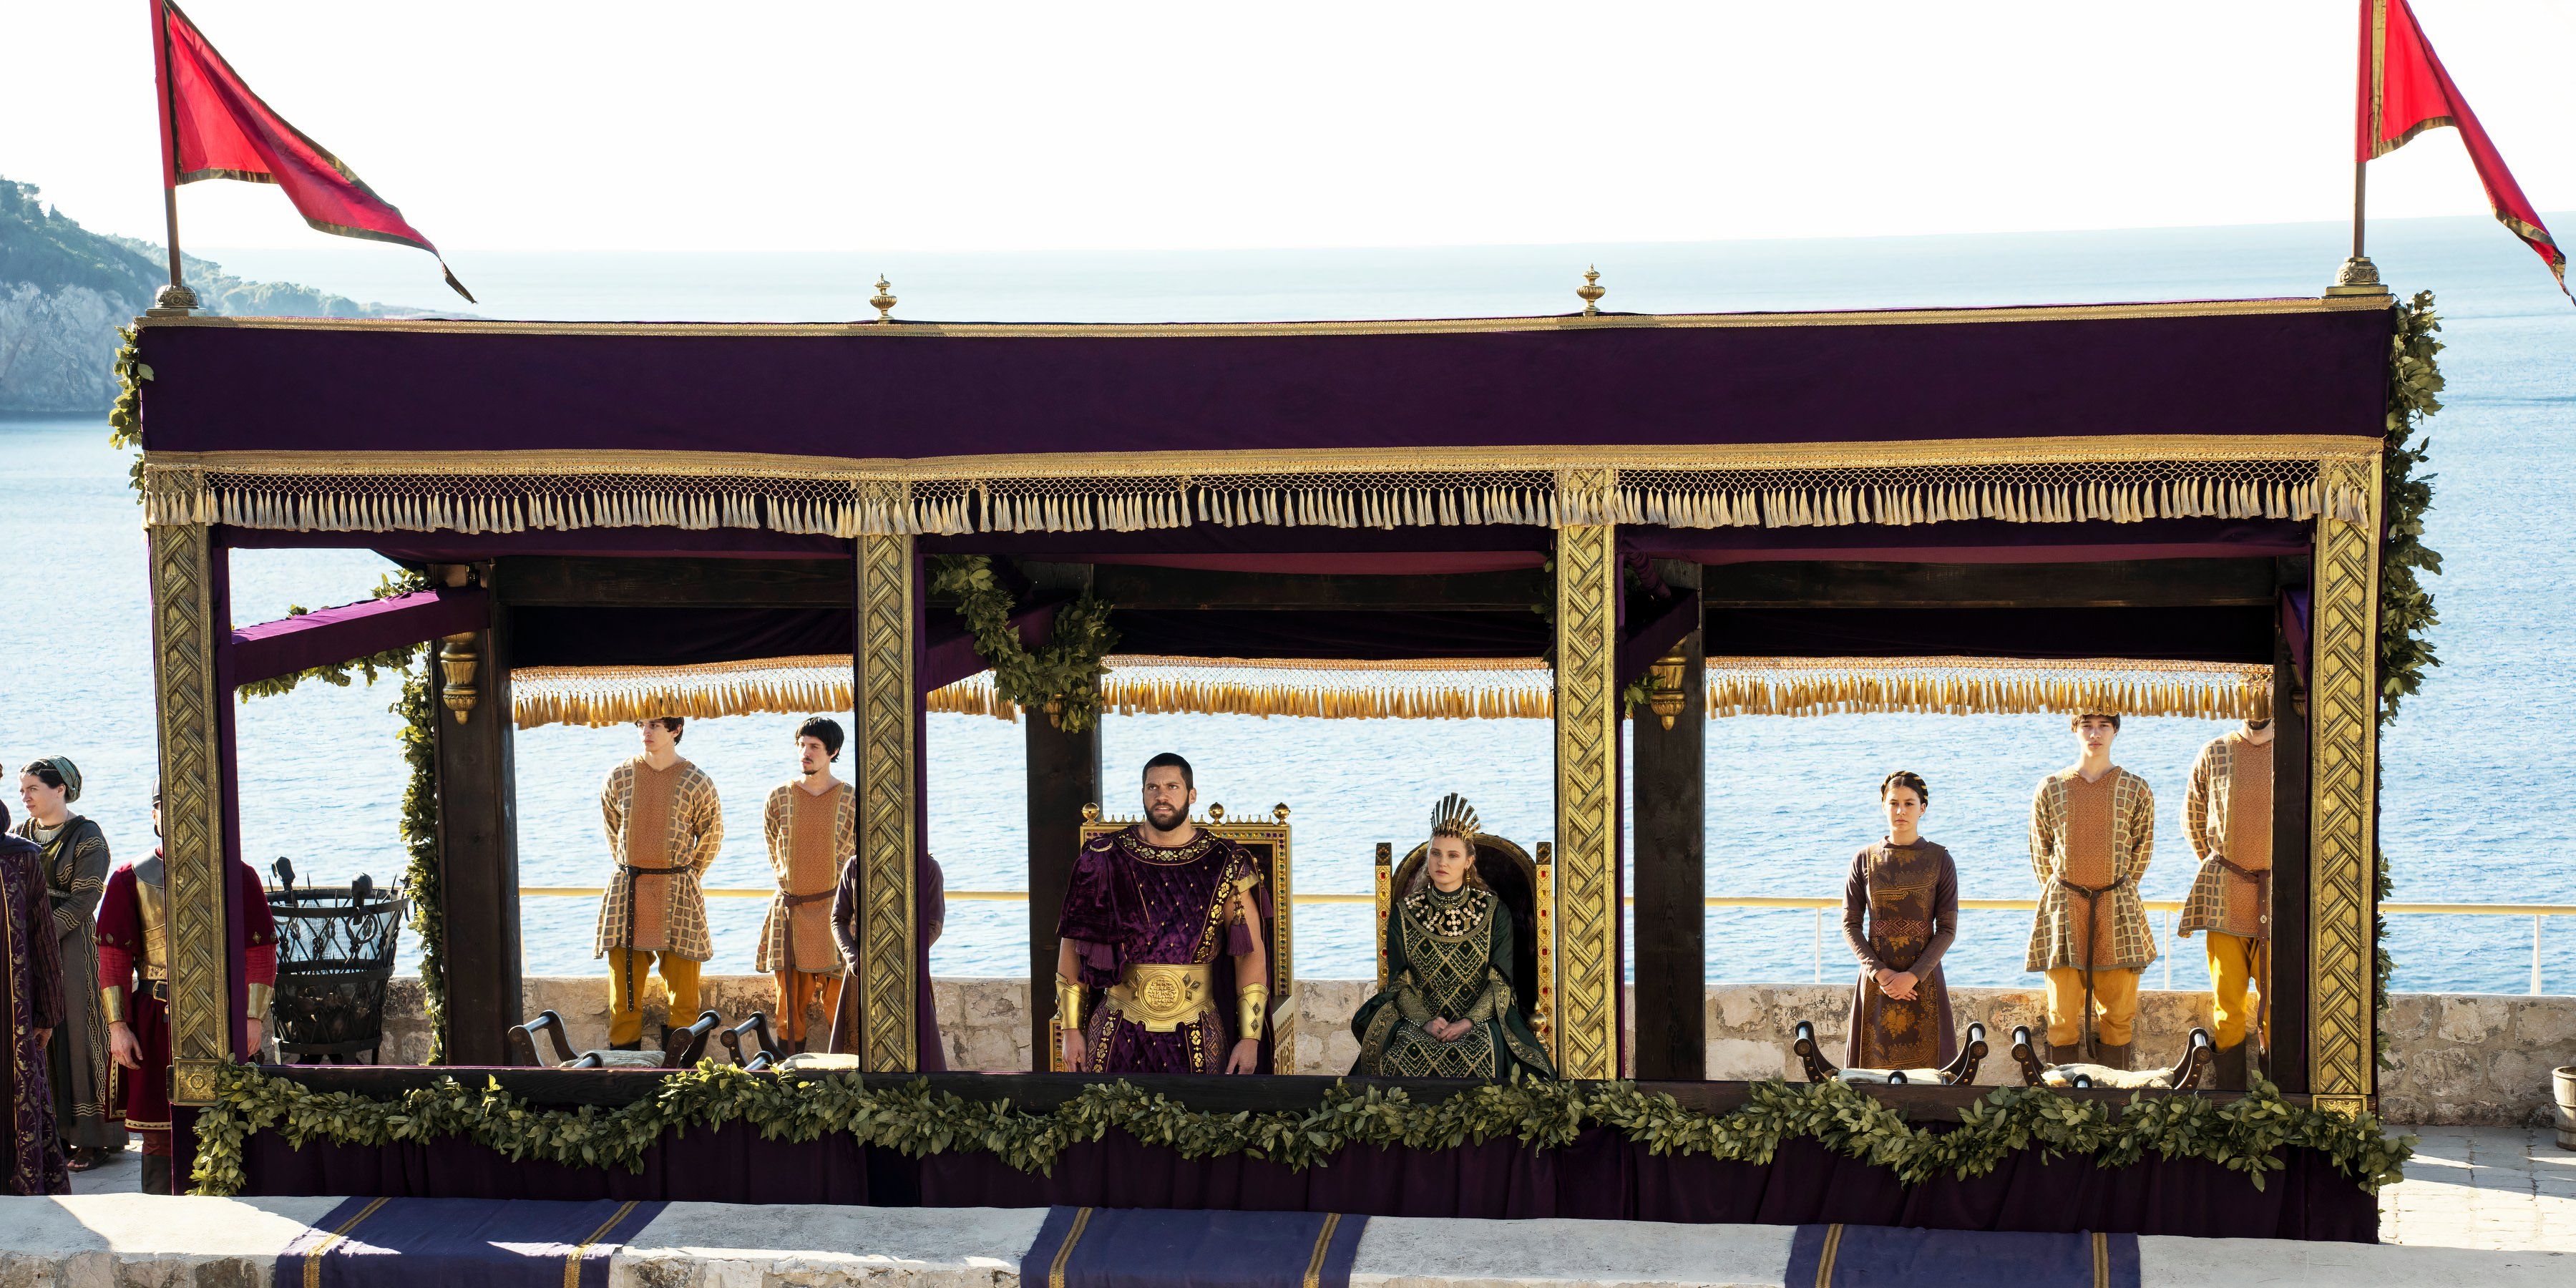 Vikings Valhalla season 3 Constantinople Emperor Maniakes and Empress Zoe with their guards